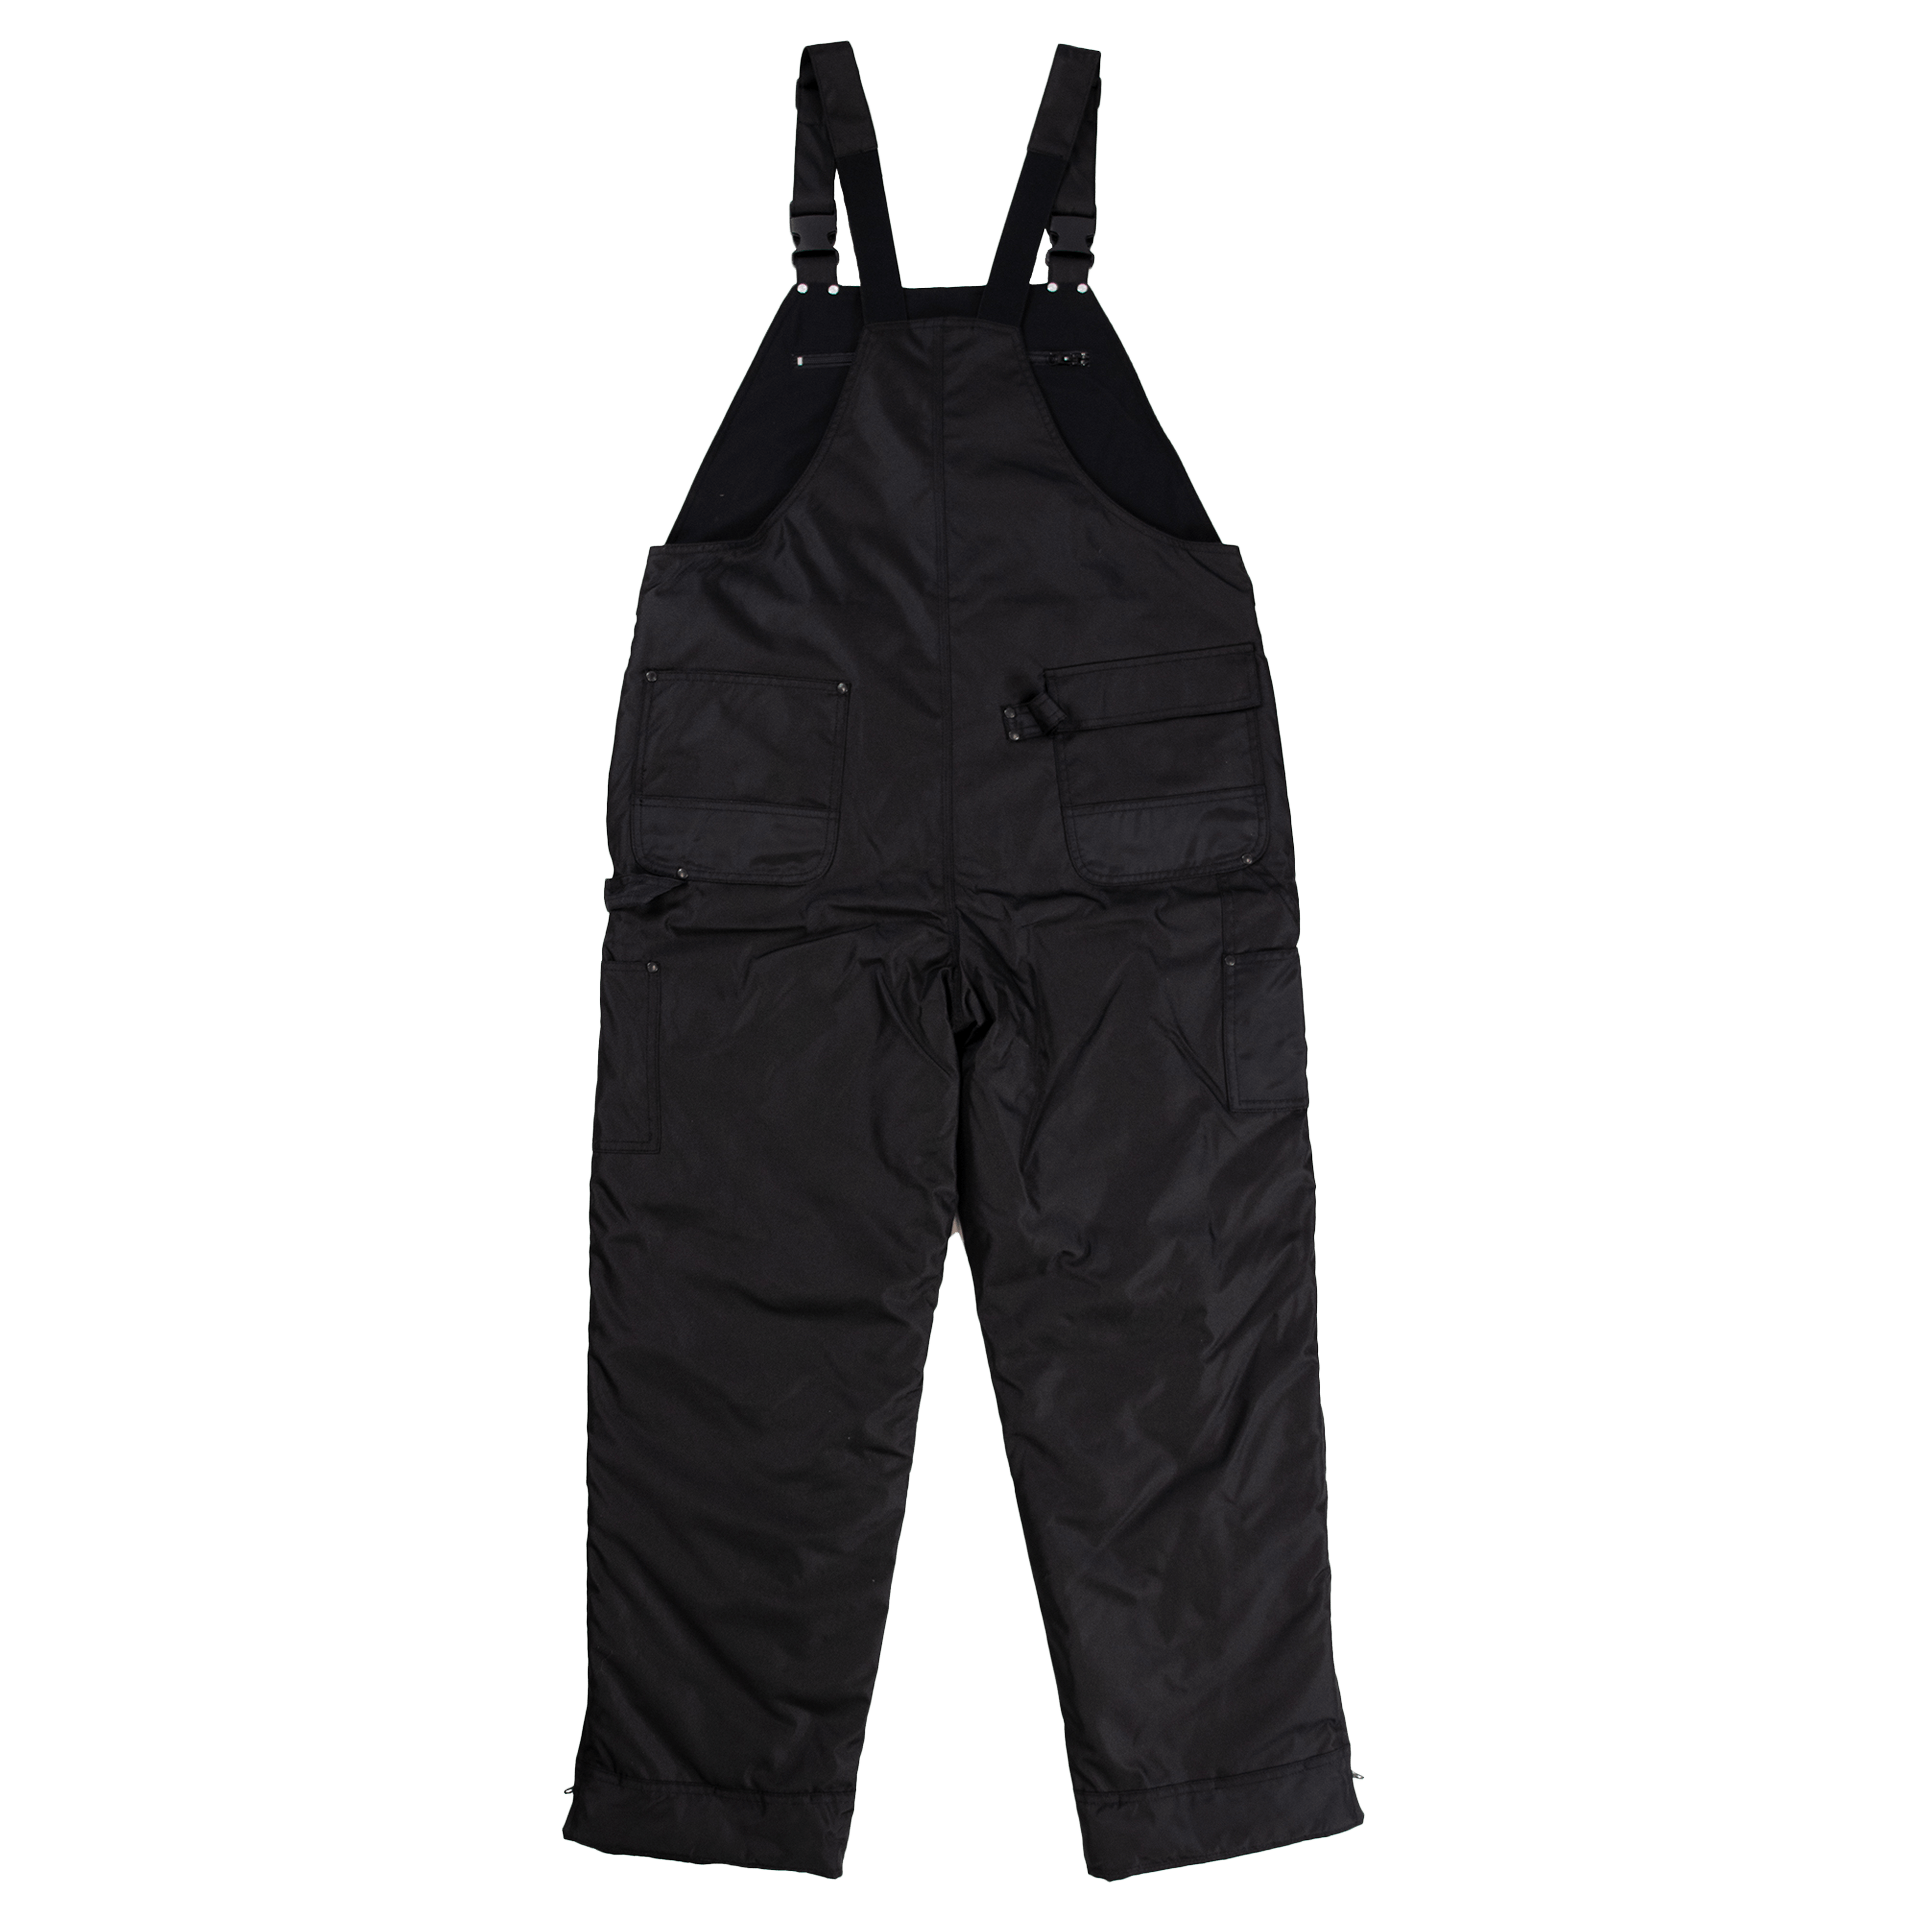 Tough Duck 7910 Insulated Waterproof Poly Oxford Bib Overalls | Black | Limited Size Selection Work Wear - Cleanflow